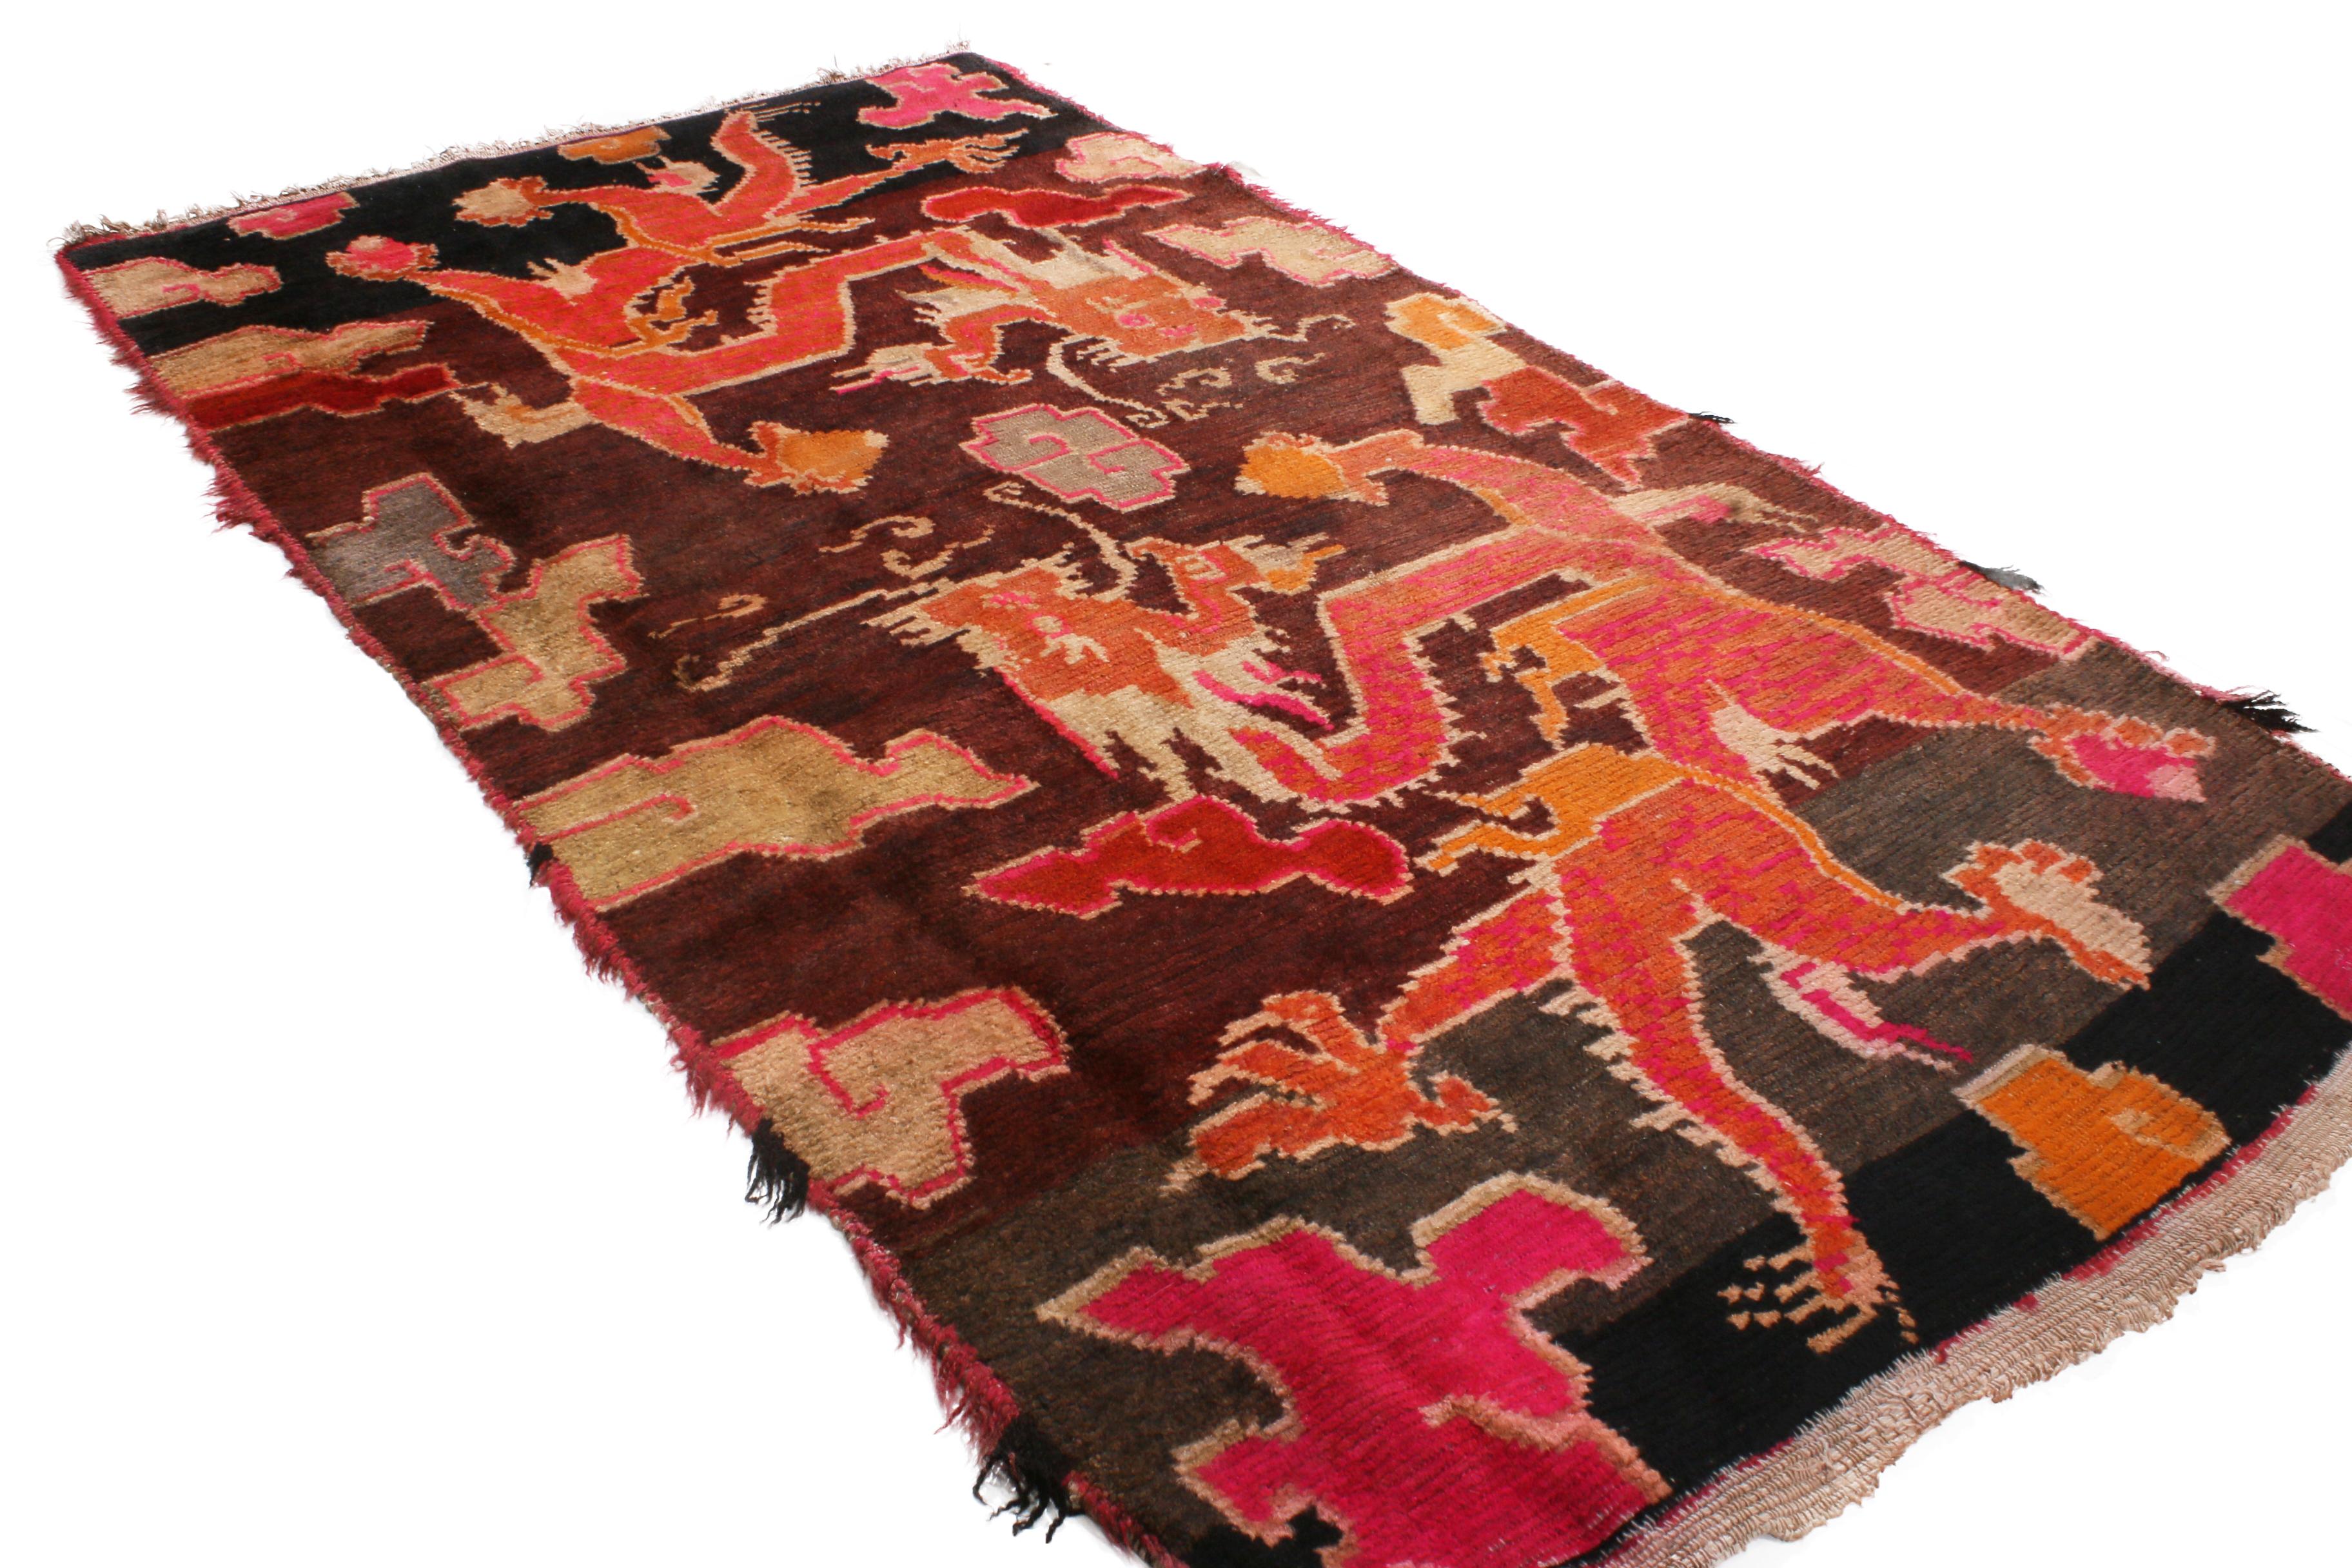 Chinese Antique Tibetan Orange and Brown Wool Rug with Dragon and Cloud Motifs